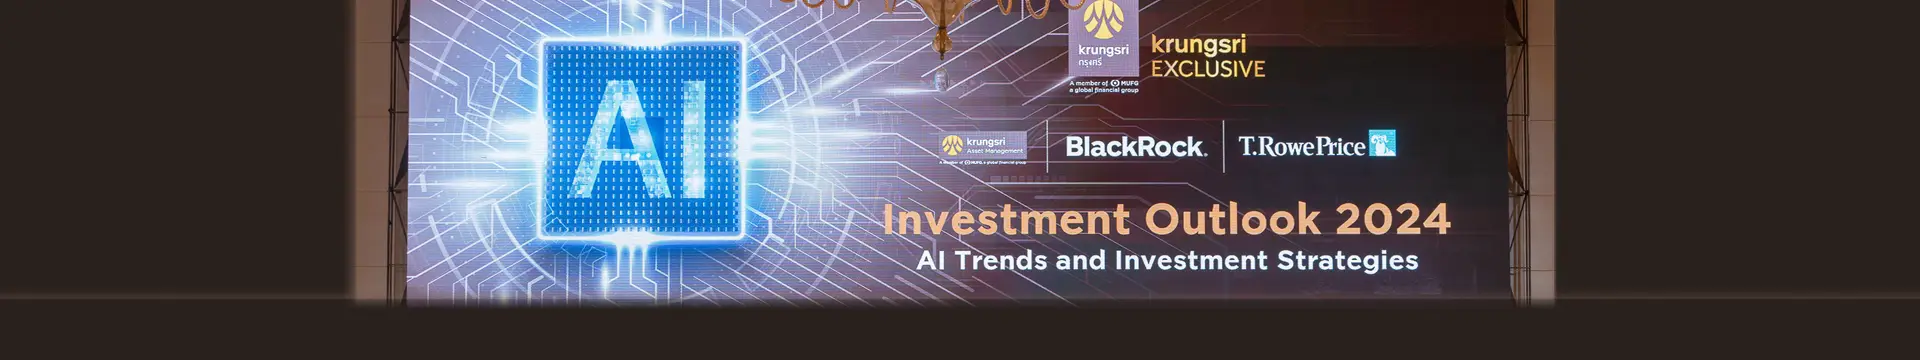 KRUNGSRI EXCLUSIVE Investment Outlook: AI Trends and Investment Strategies